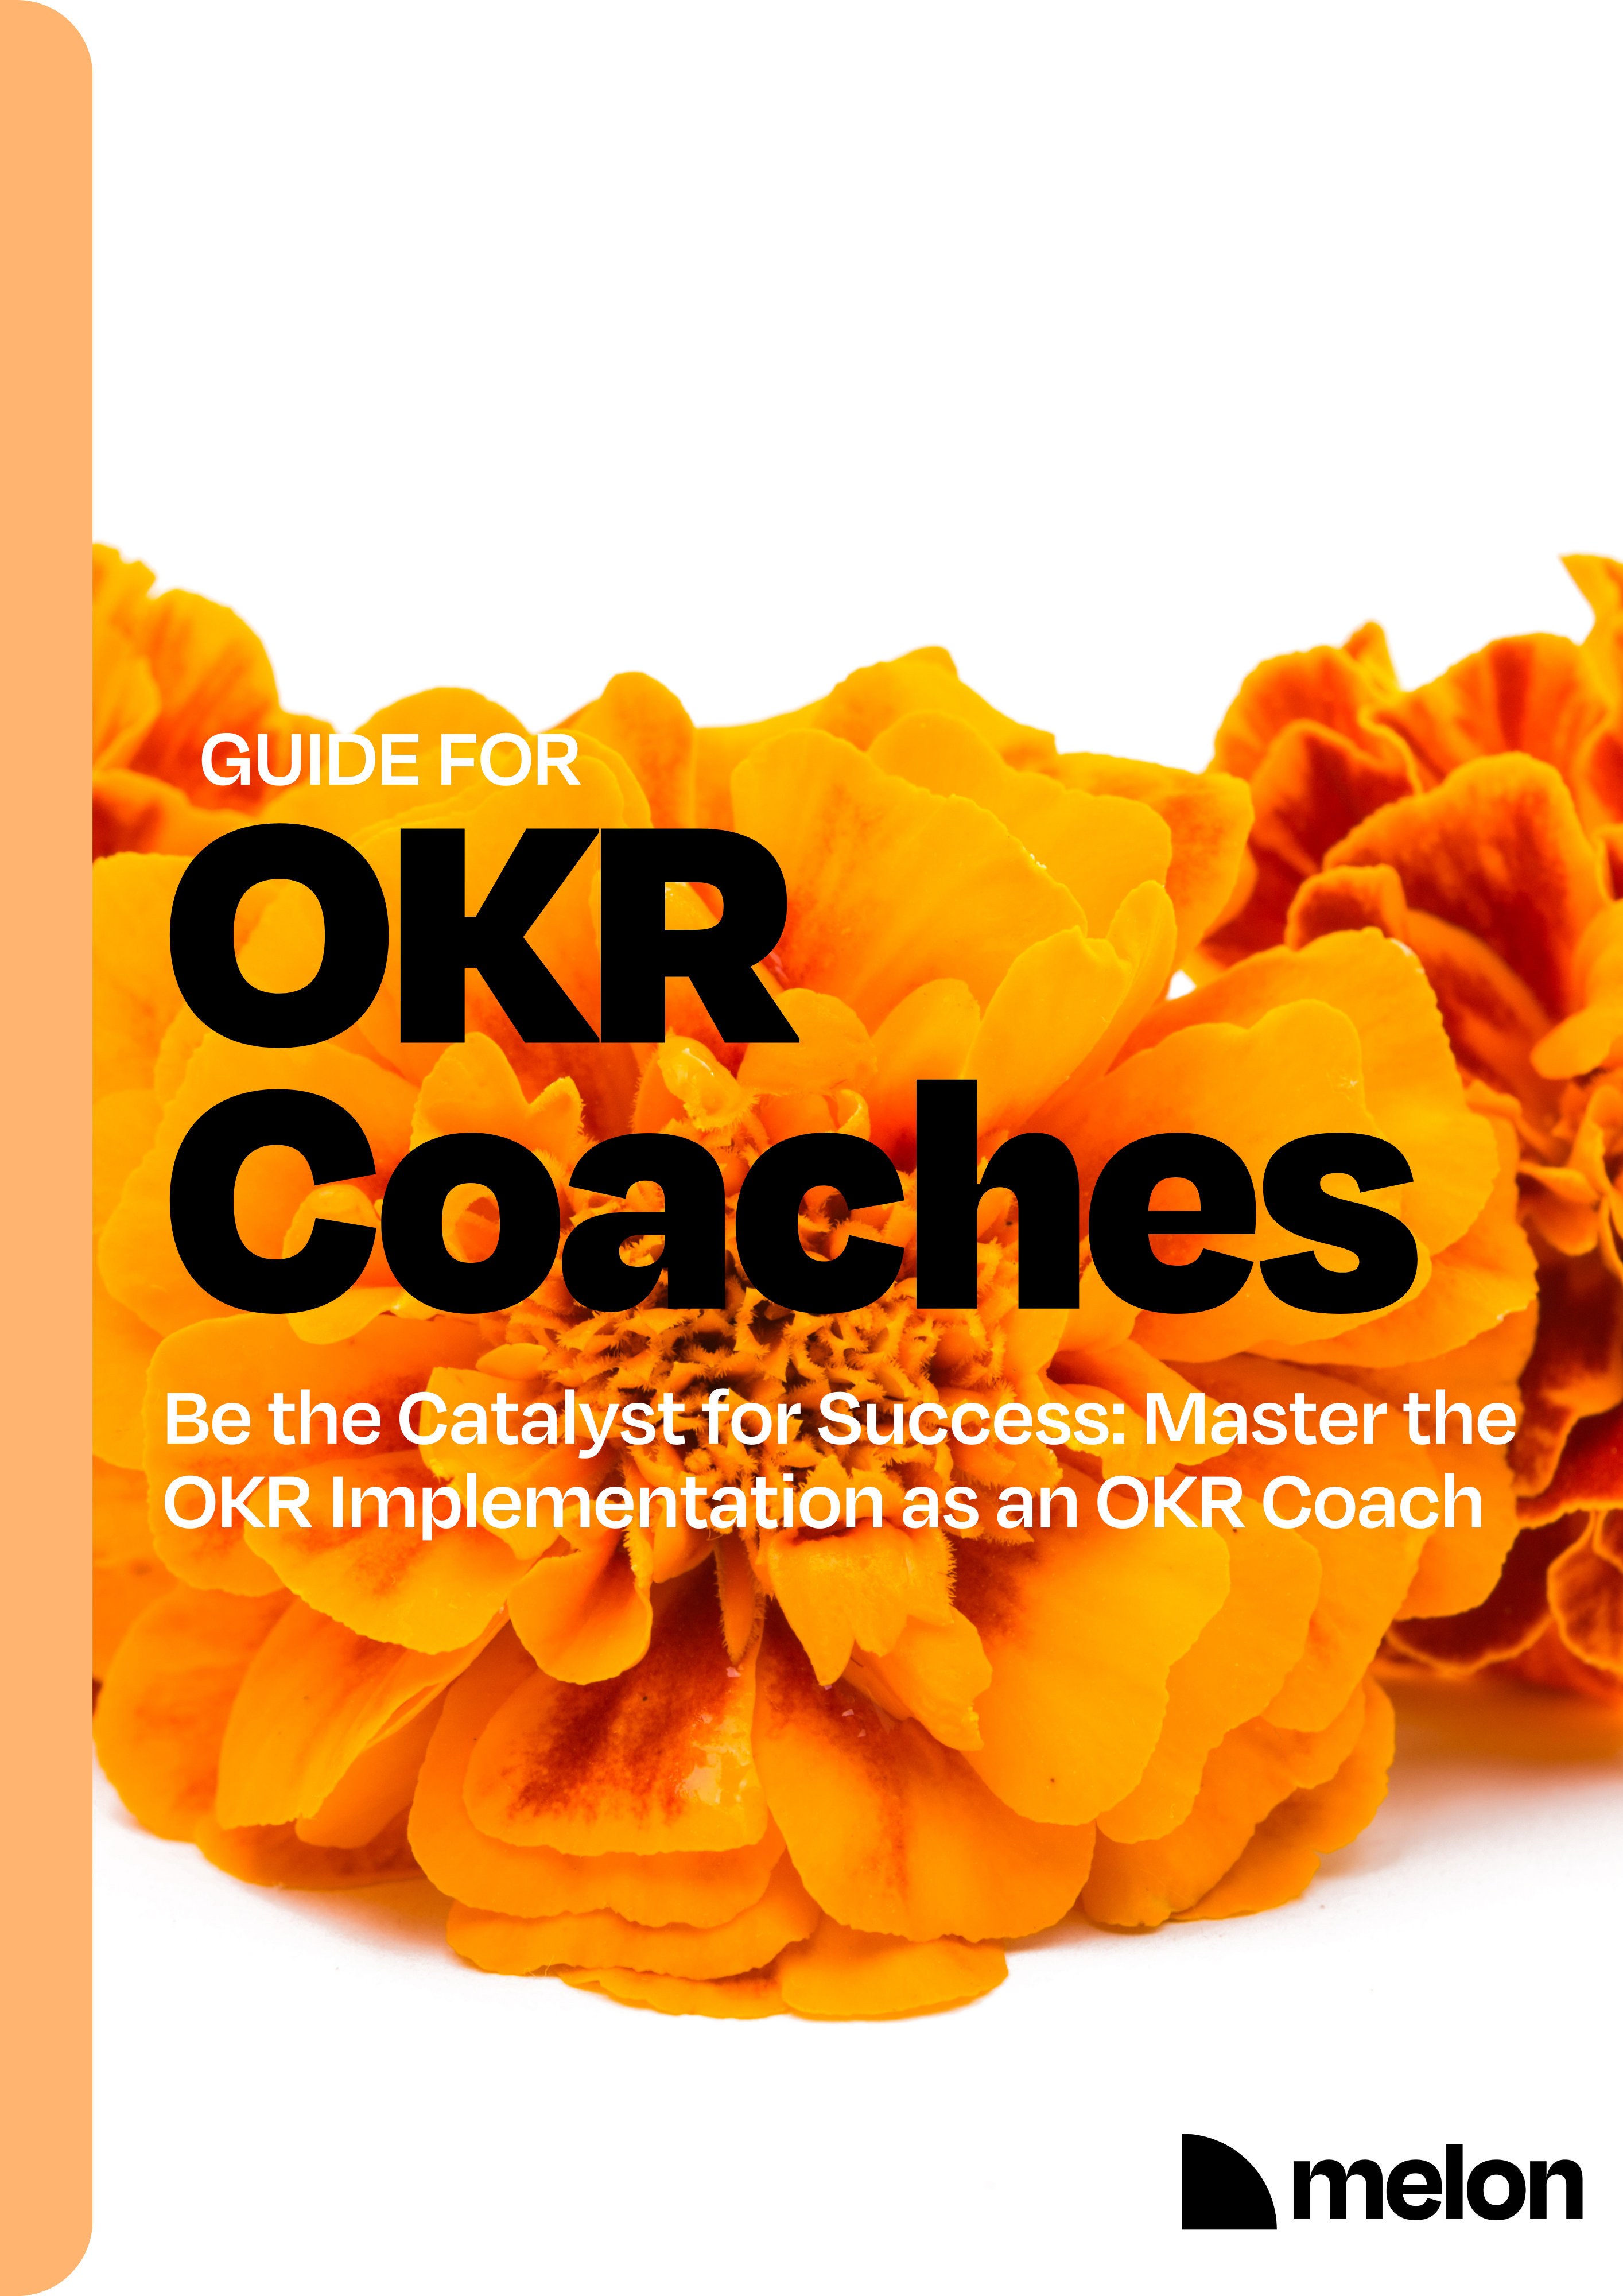 Guide for OKR Coaches